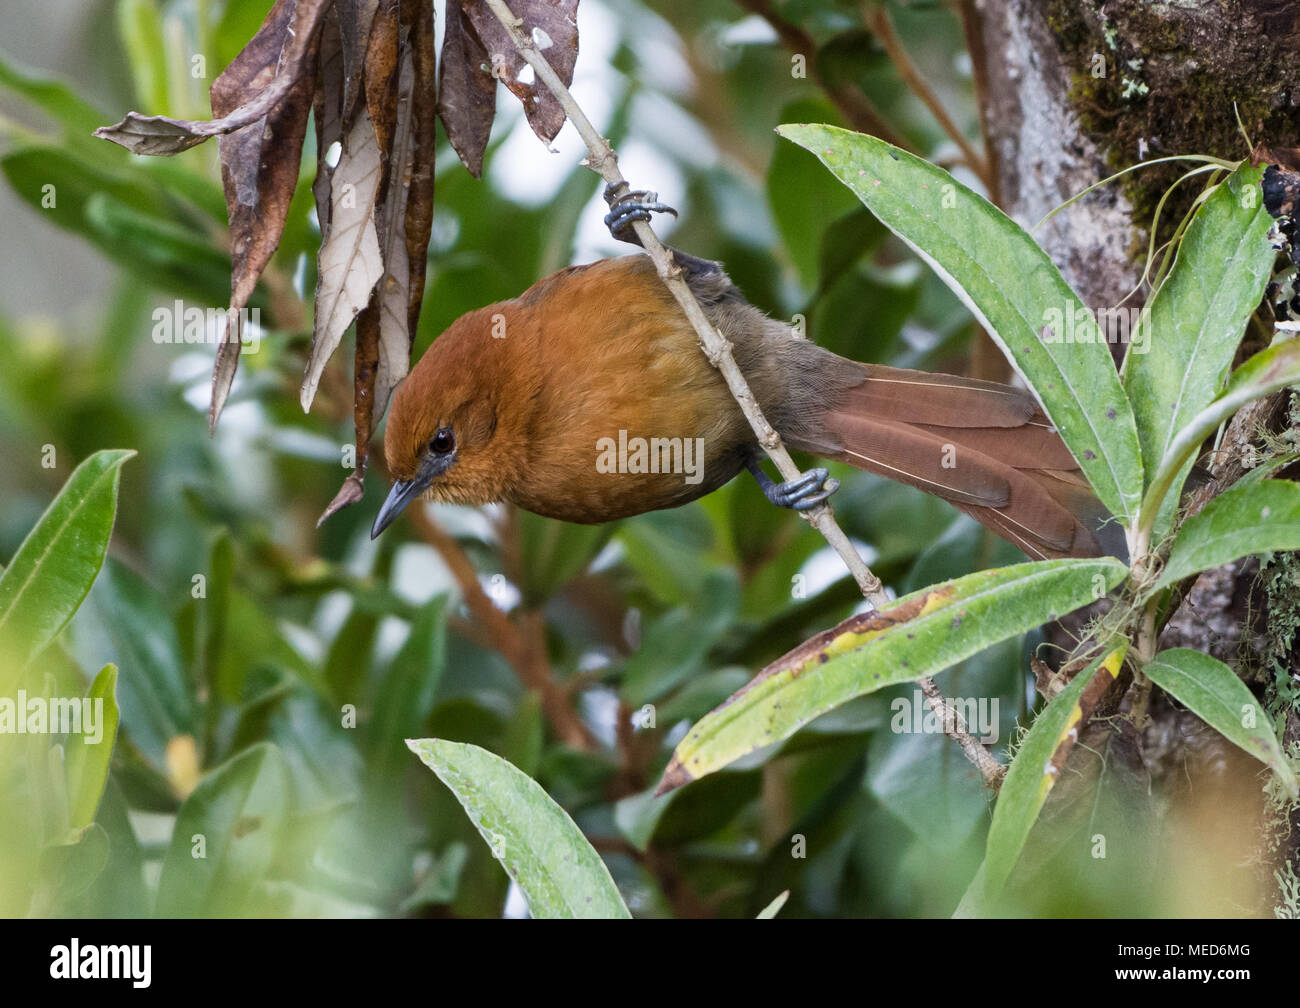 A Rusty-headed Spinetail (Synallaxis fuscorufa) foraging in the forest. Colombia, South America. Stock Photo